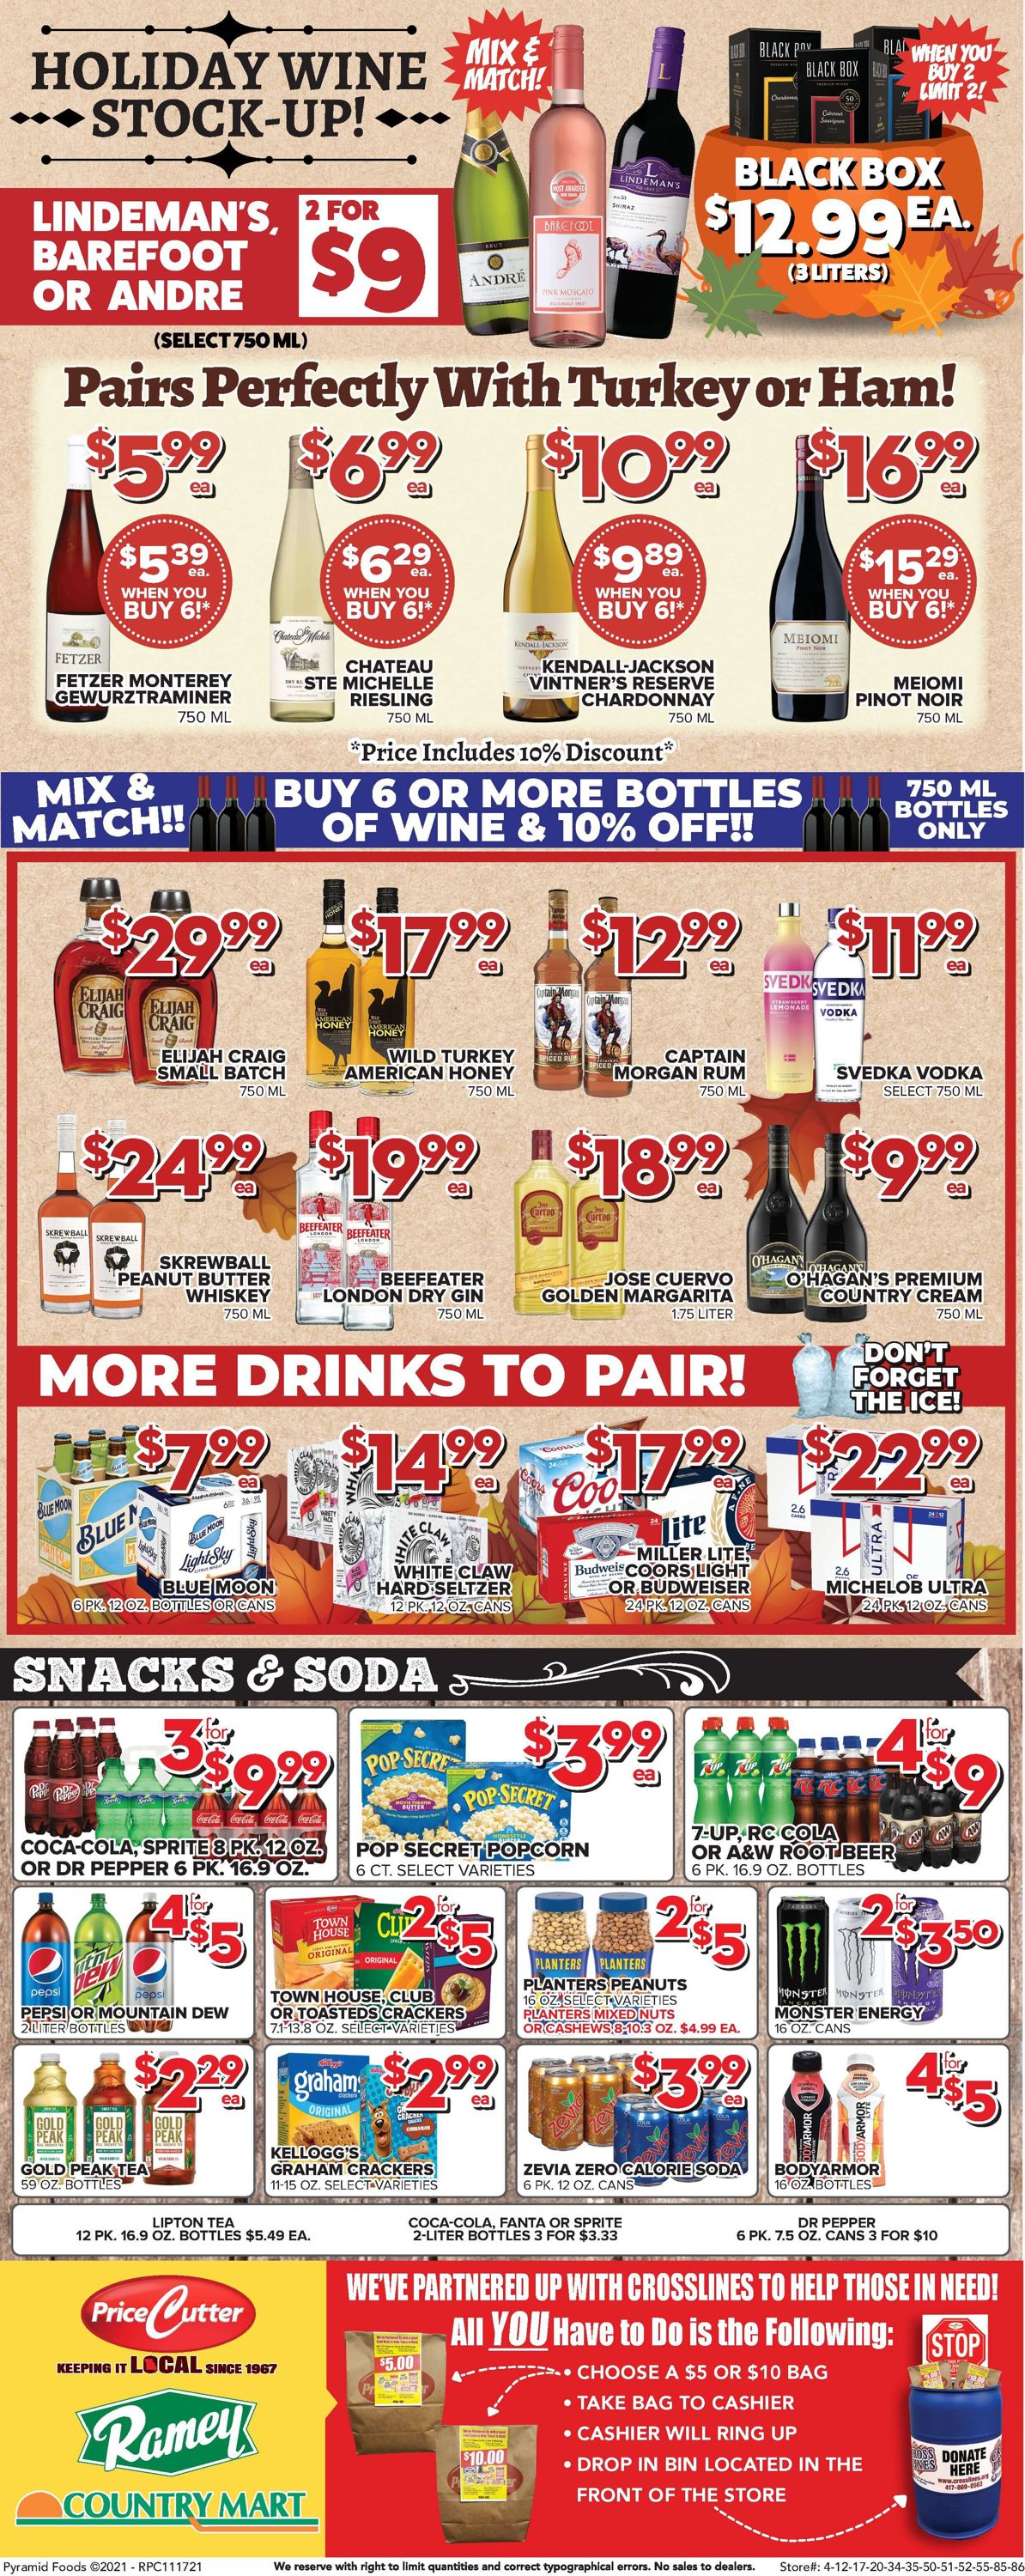 Price Cutter THANKSGIVING 2021 Weekly Ad Circular - valid 11/17-11/25/2021 (Page 4)